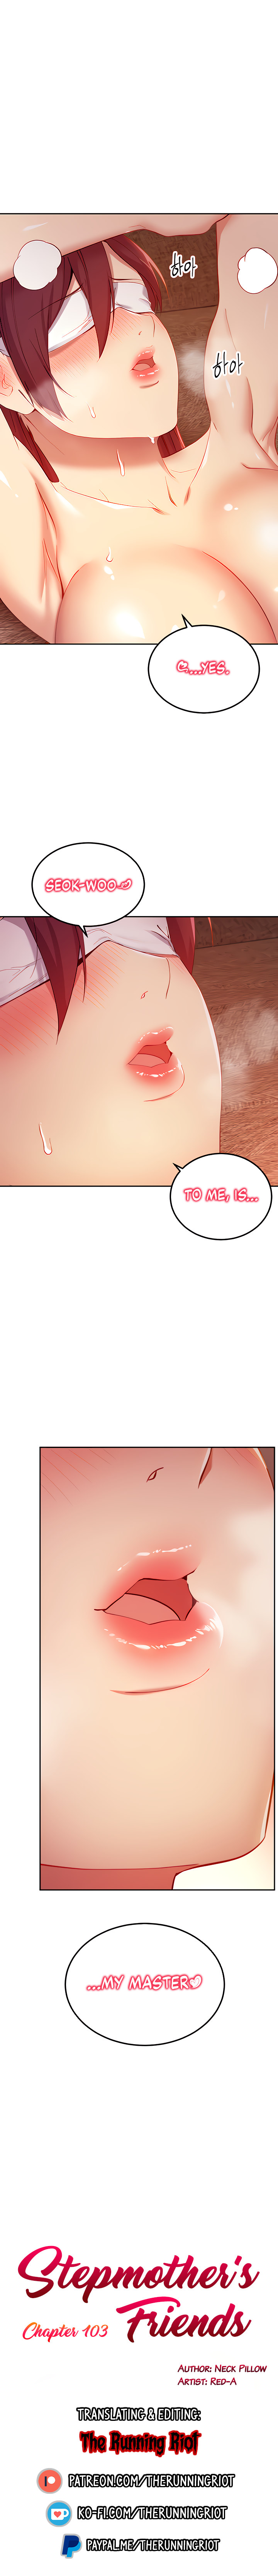 Panel Image 1 for chapter 103 of manhwa Stepmother